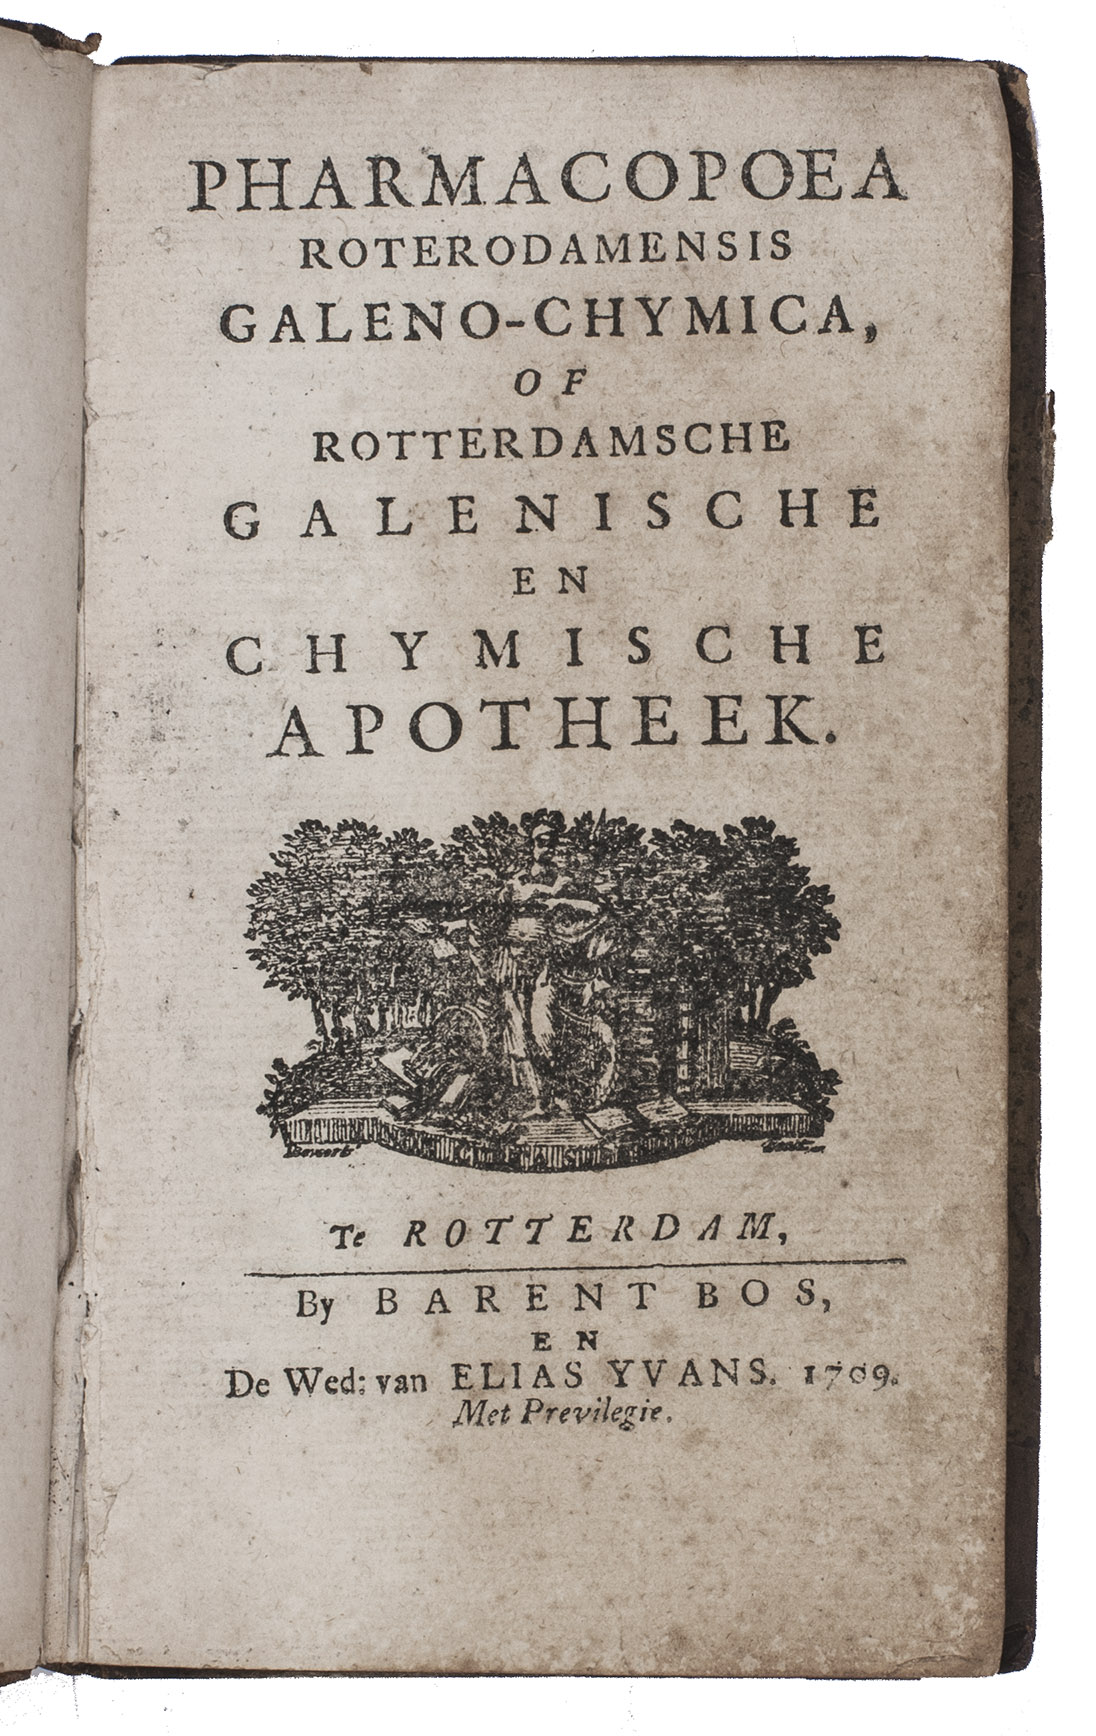 [ROTTERDAM - PHARMACOPOEIA]. - Pharmacopoea Roterodamensis Galeno-chymica, of Rotterdamsche Galenische en chymische apotheek.Rotterdam, Barent Bos and widow of Elias Yvans, 1709. 8vo. With woodcut device on title-page. Contemporary half calf, gold-tooled spine with a tulip motif.